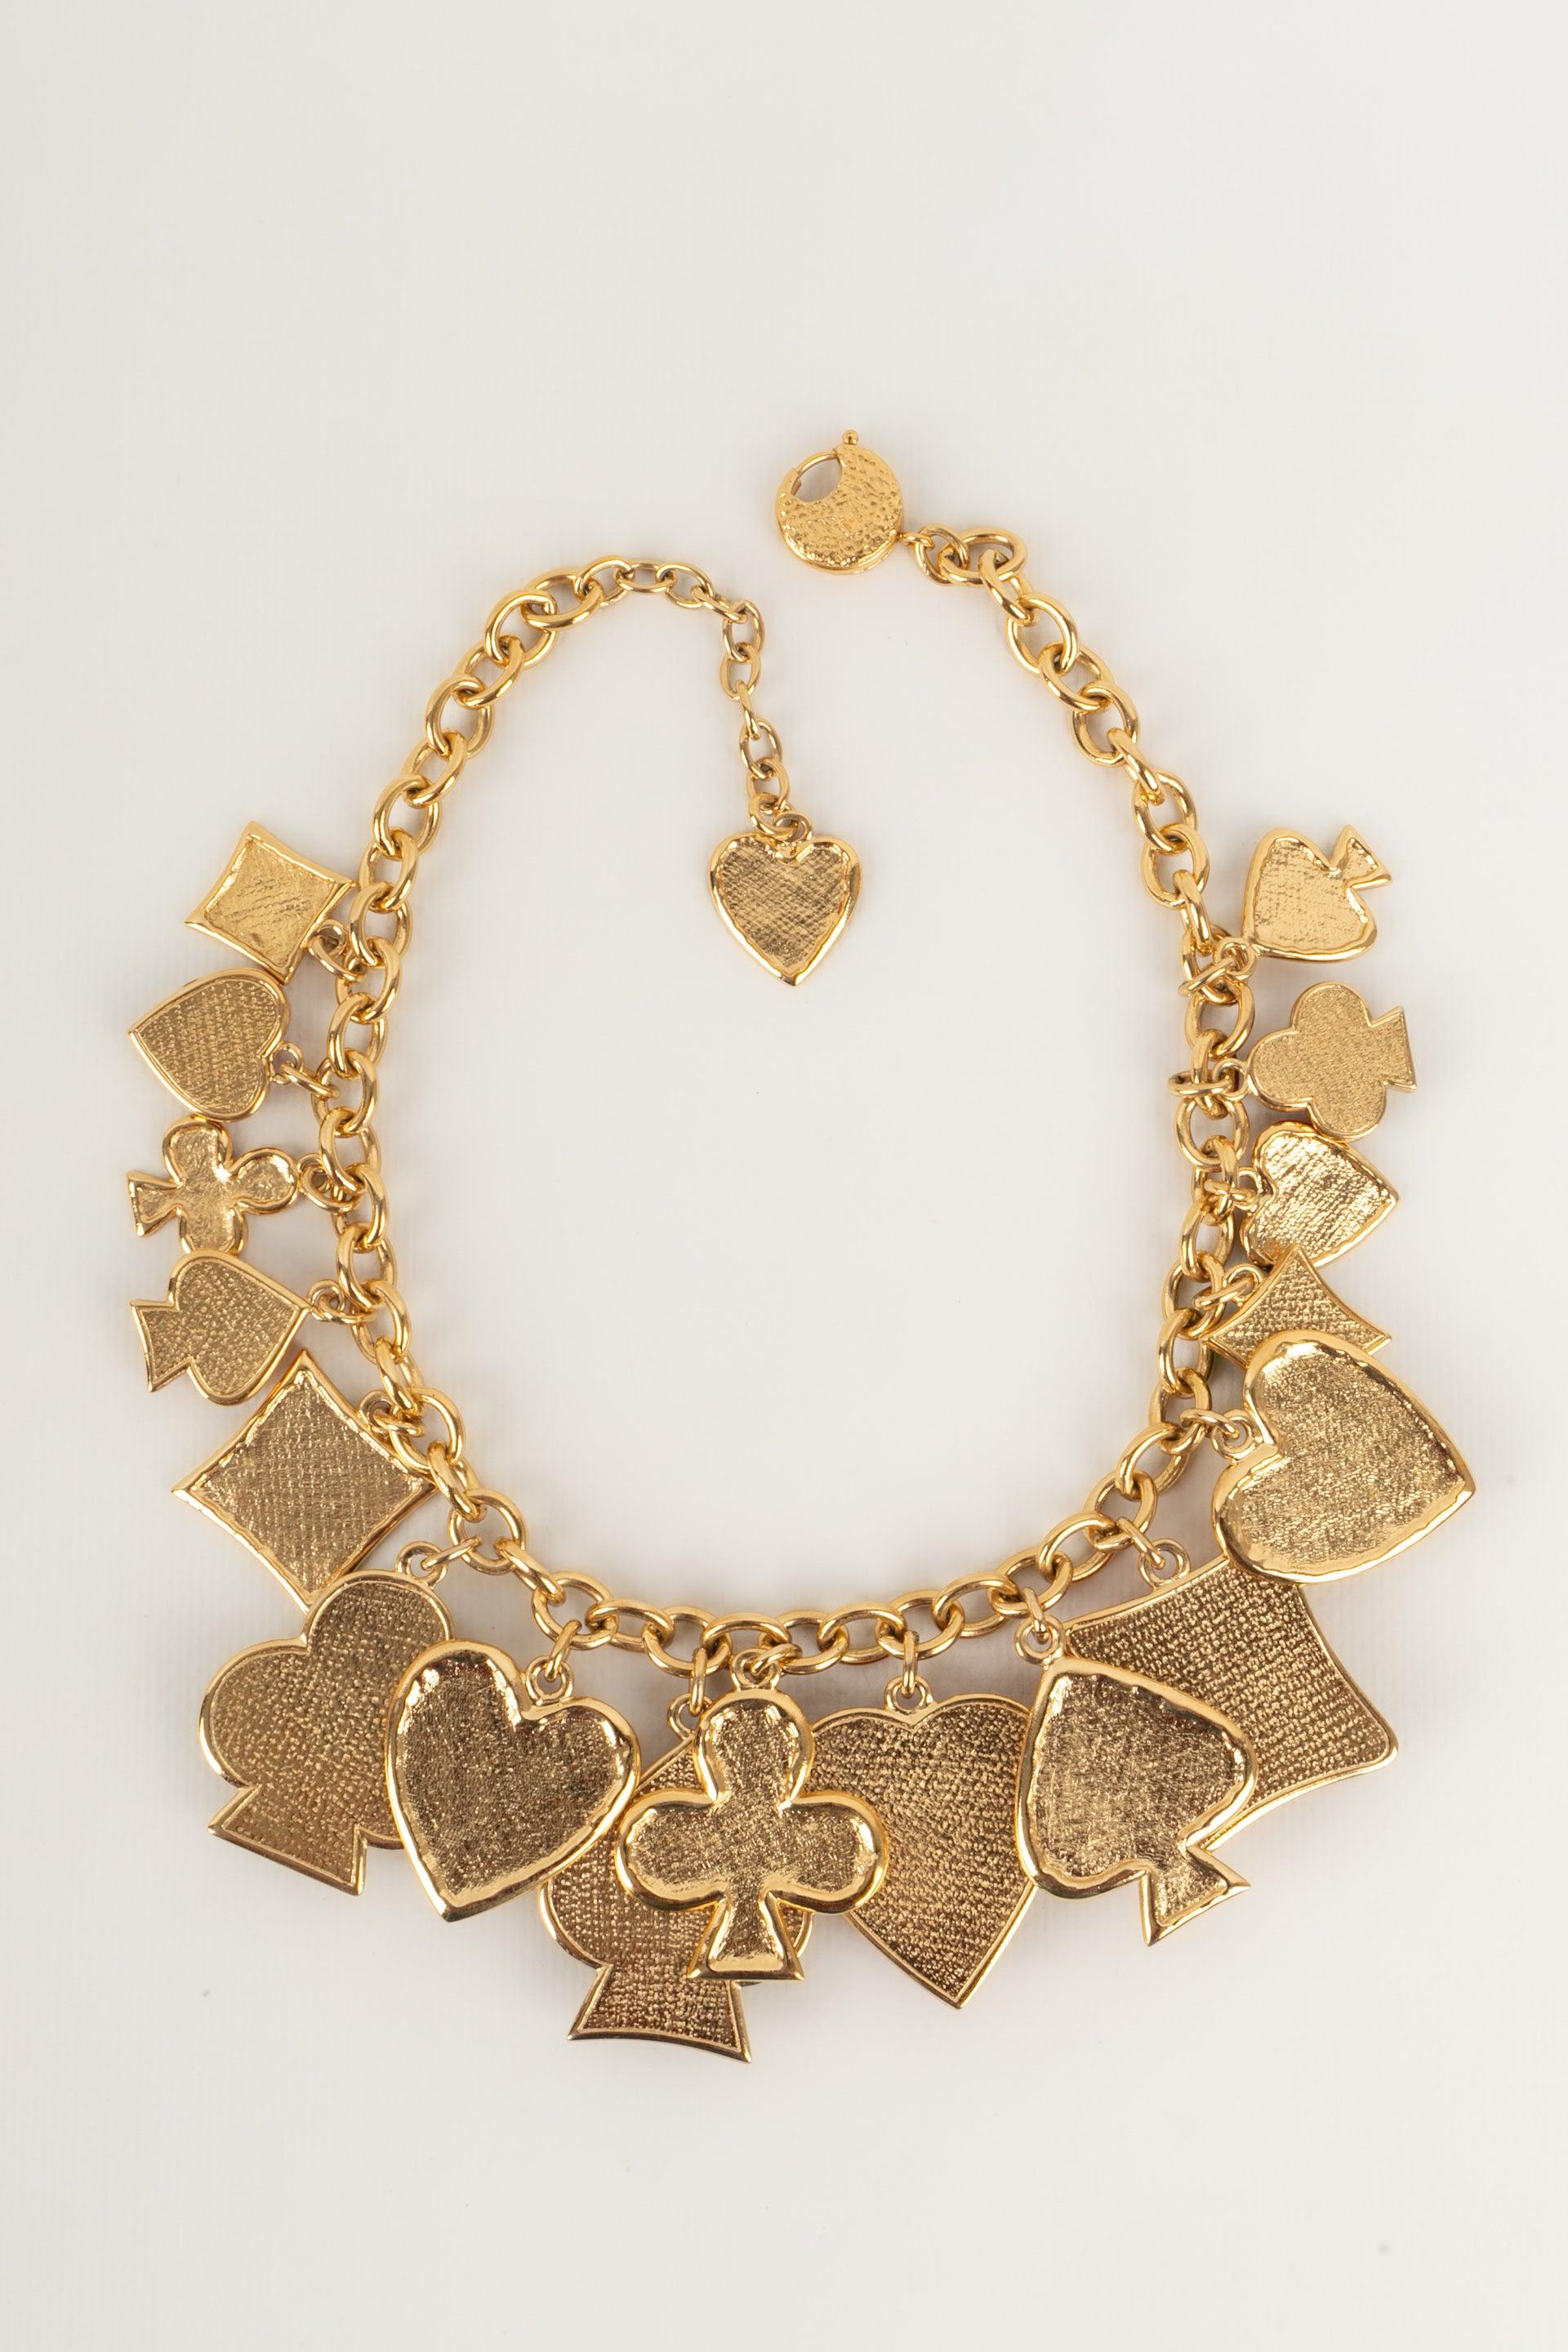 Yves Saint Laurent Golden Metal and Resin Charm Necklace 3